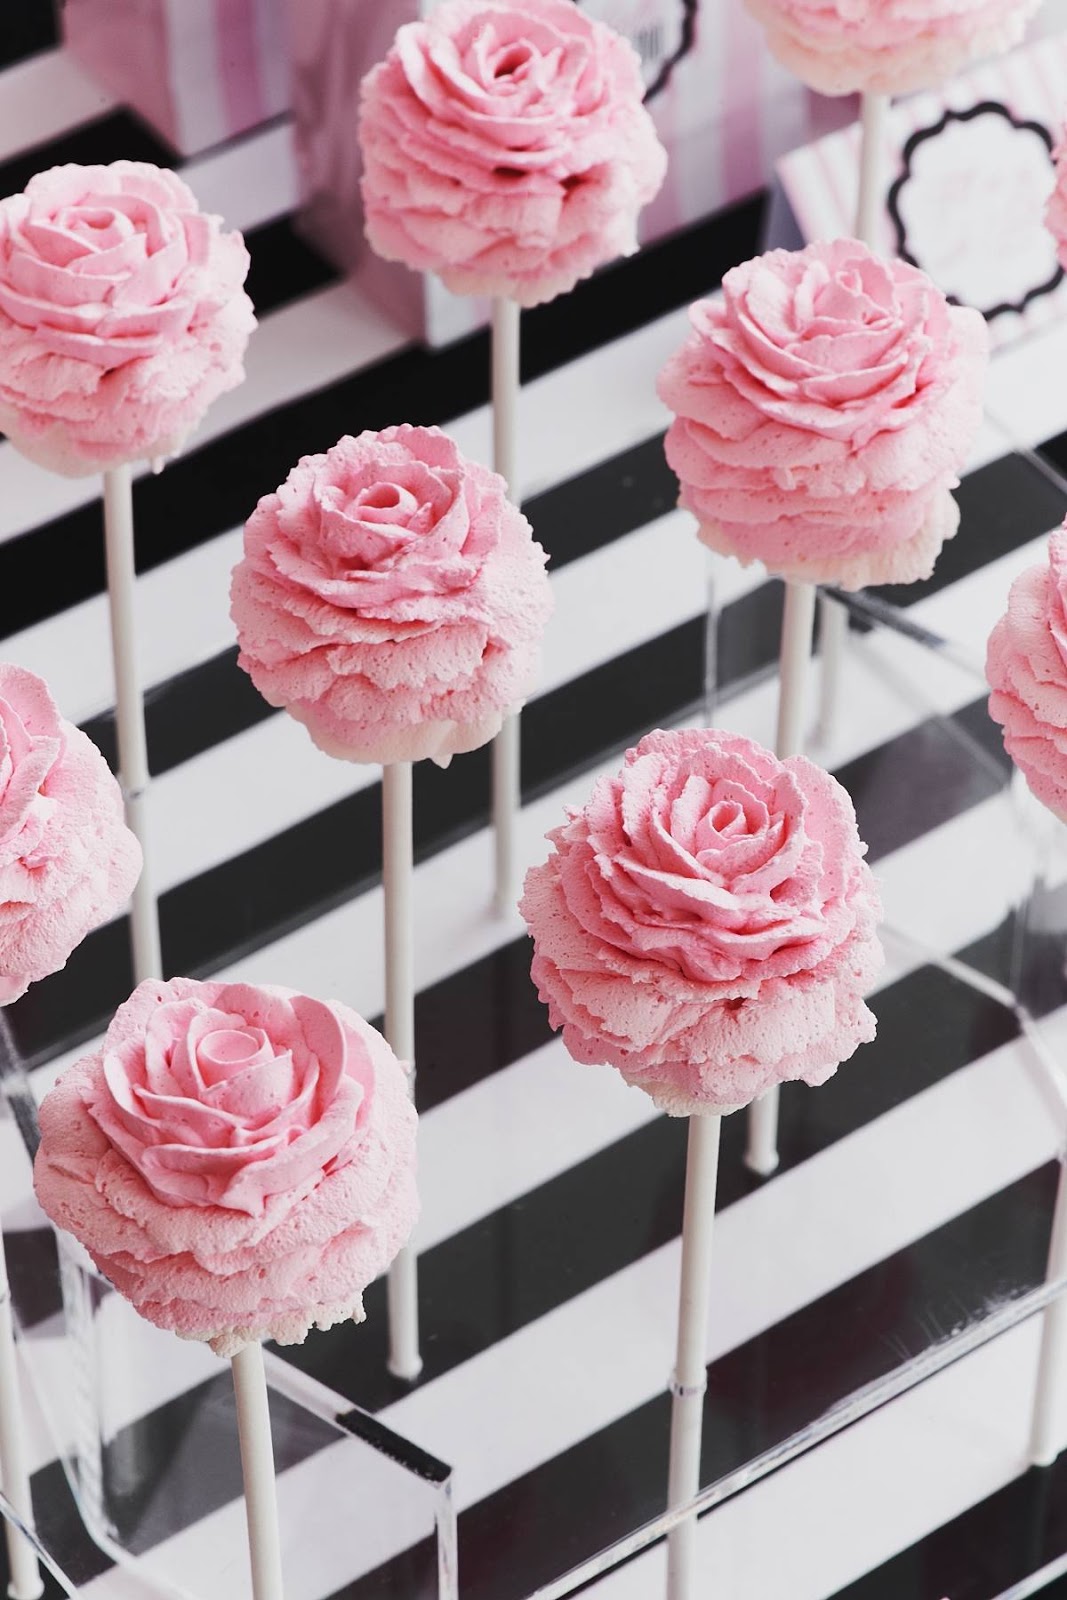 The style of cake pops are only limited by your imagination. Image: Sweet Empire